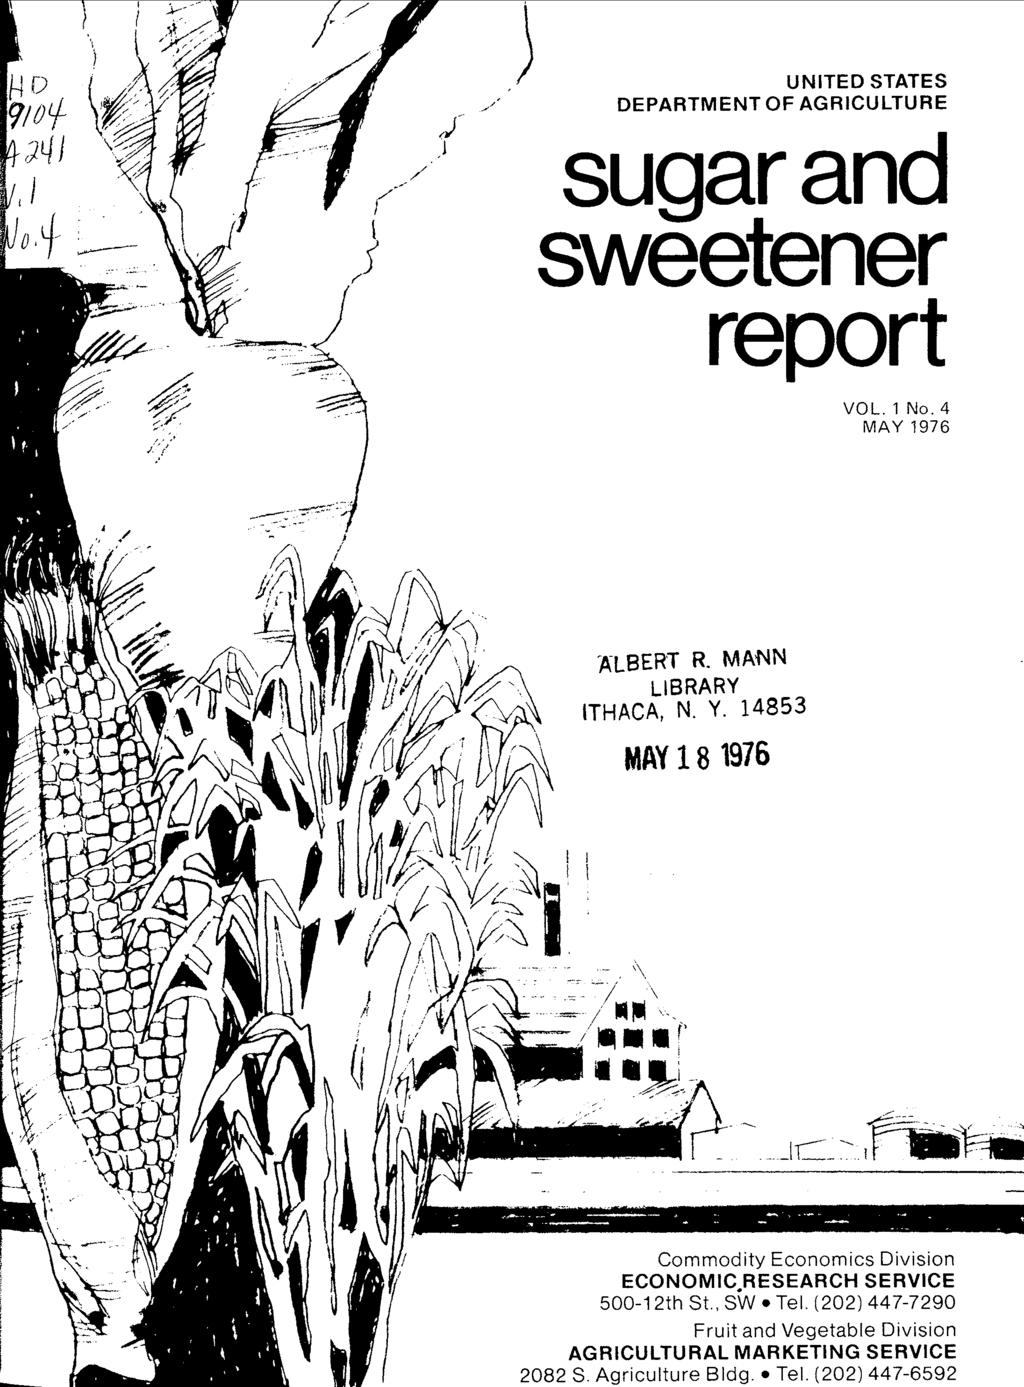 UNITED STATES DEPARTMENT OF AGRICULTURE sugar and sweetener report VOL. 1 No.4 MAY 1976 ~LBERT R. MANN LIBRARY ITHACA, N. Y.